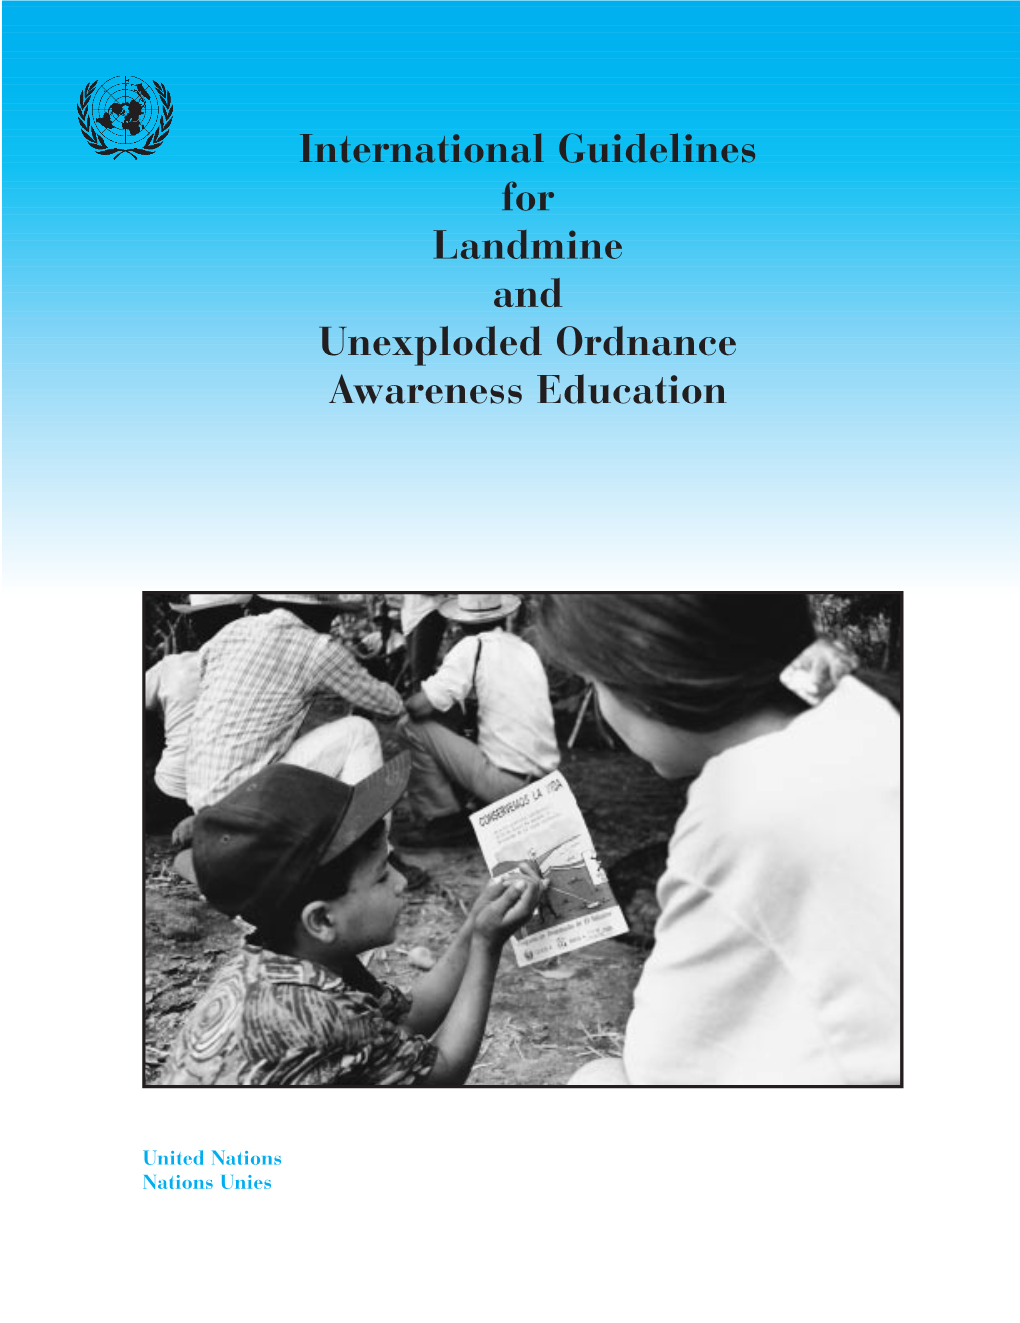 International Guidelines for Landmine and Unexploded Ordnance Awareness Education